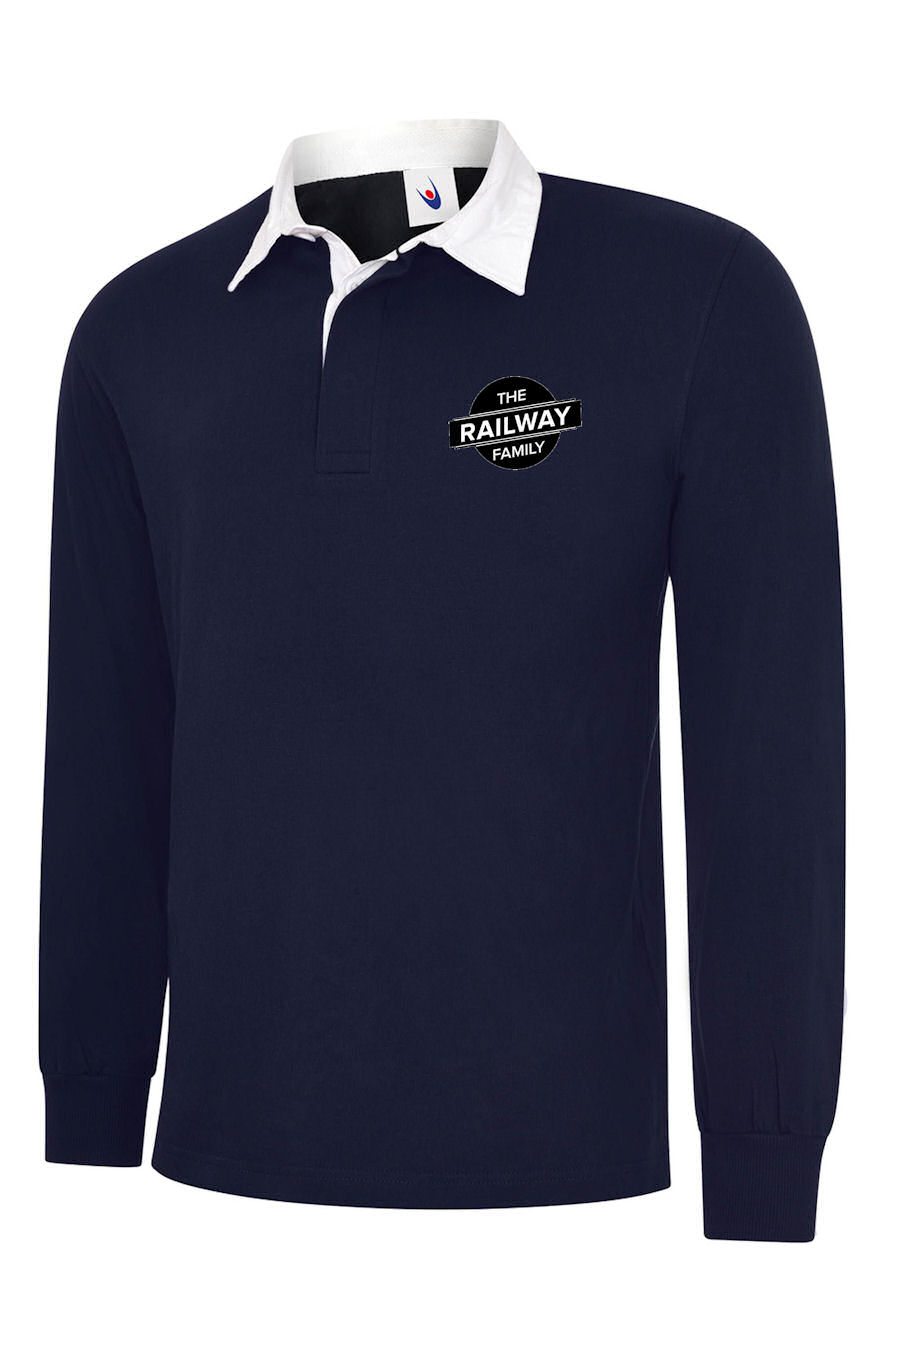 Rugby Shirt – Railway Family